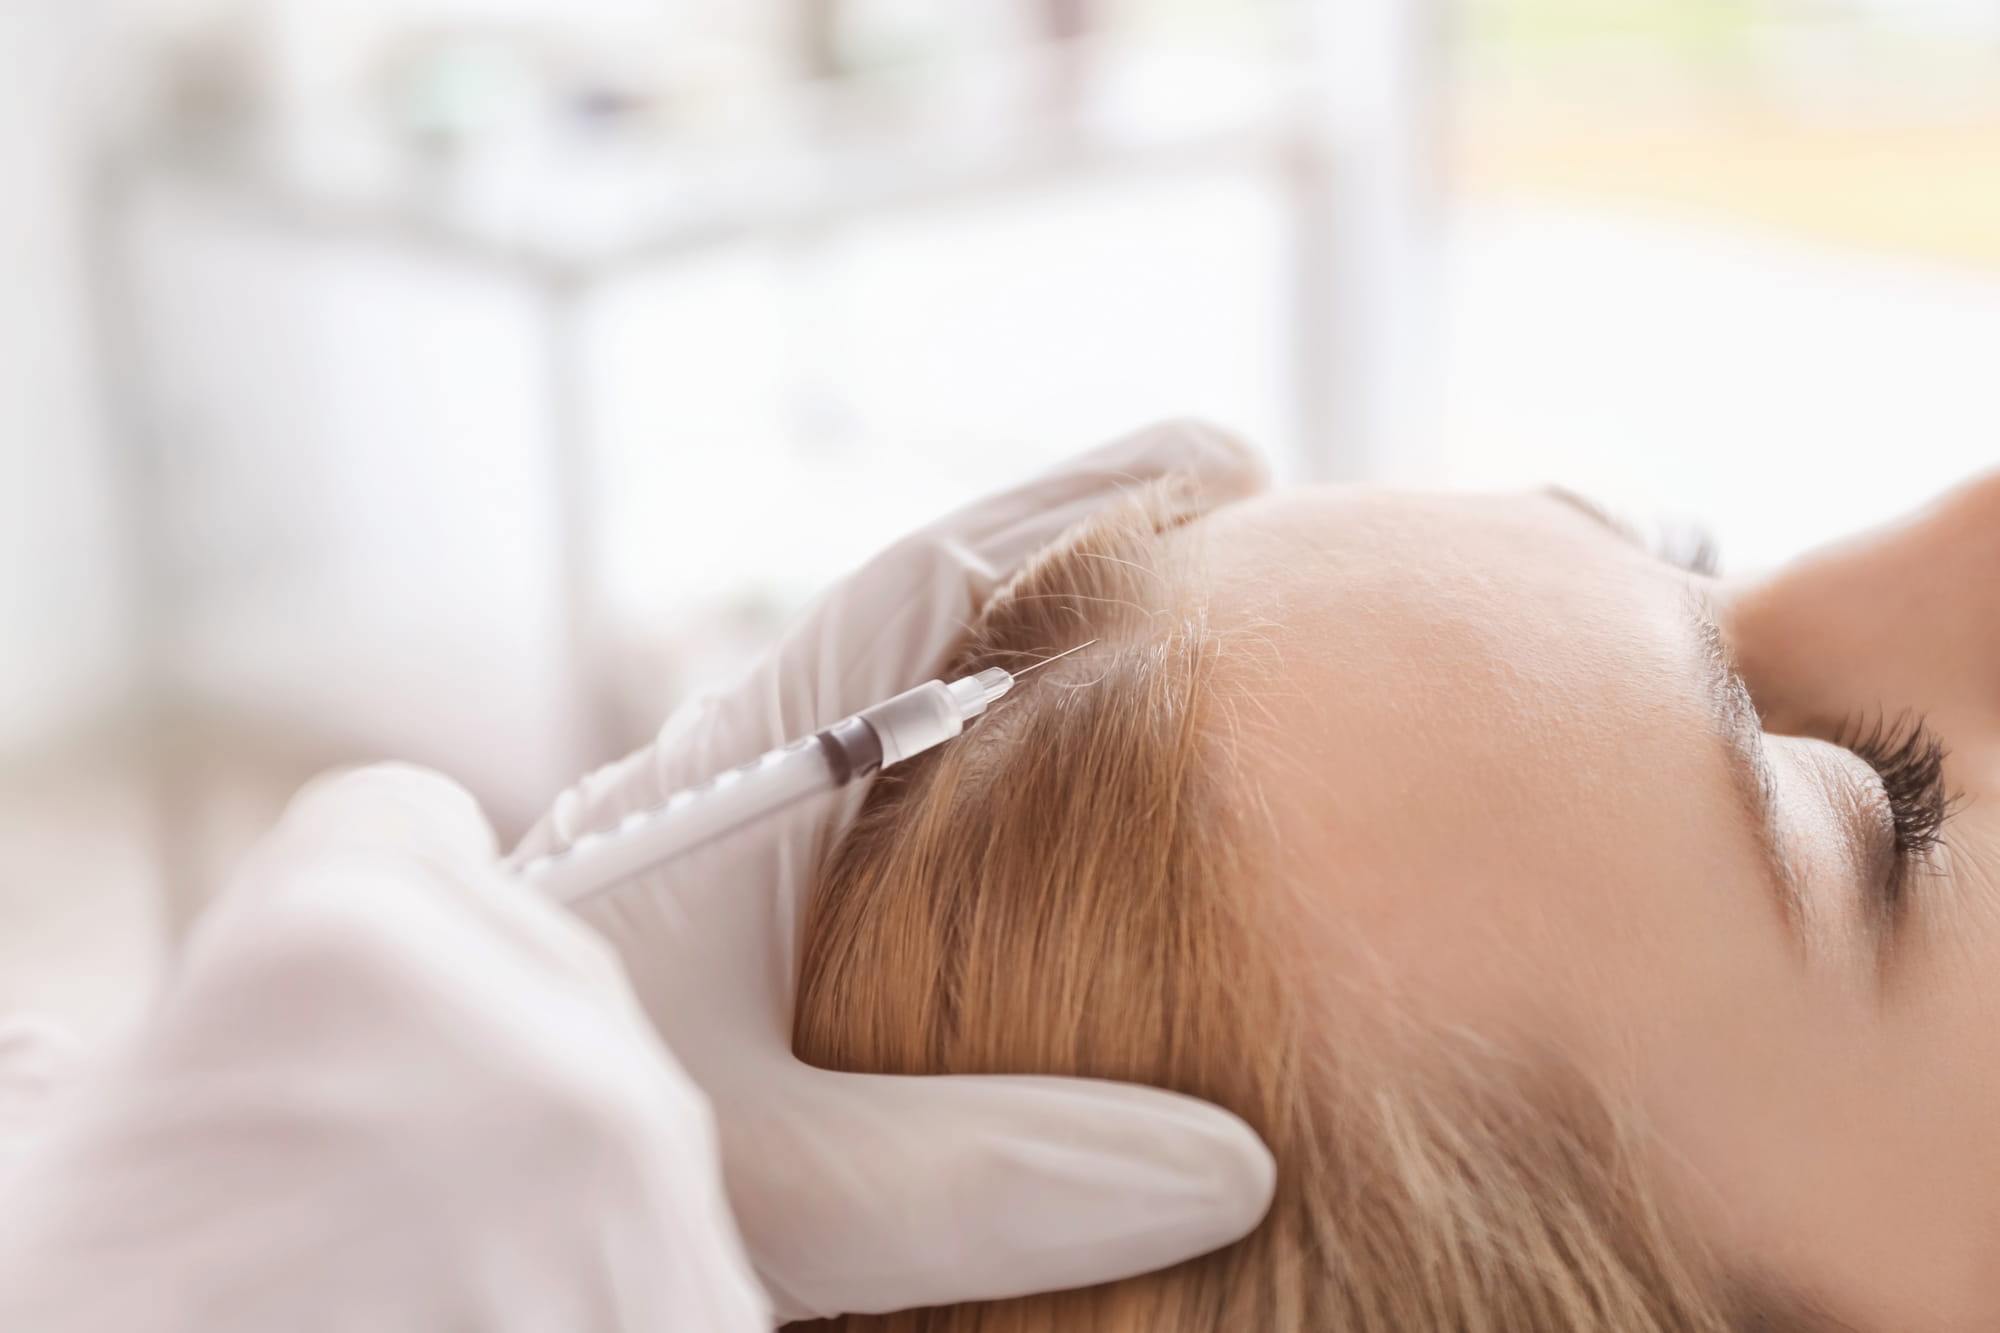 Botox for Hair: Efficacy, Safety, and More